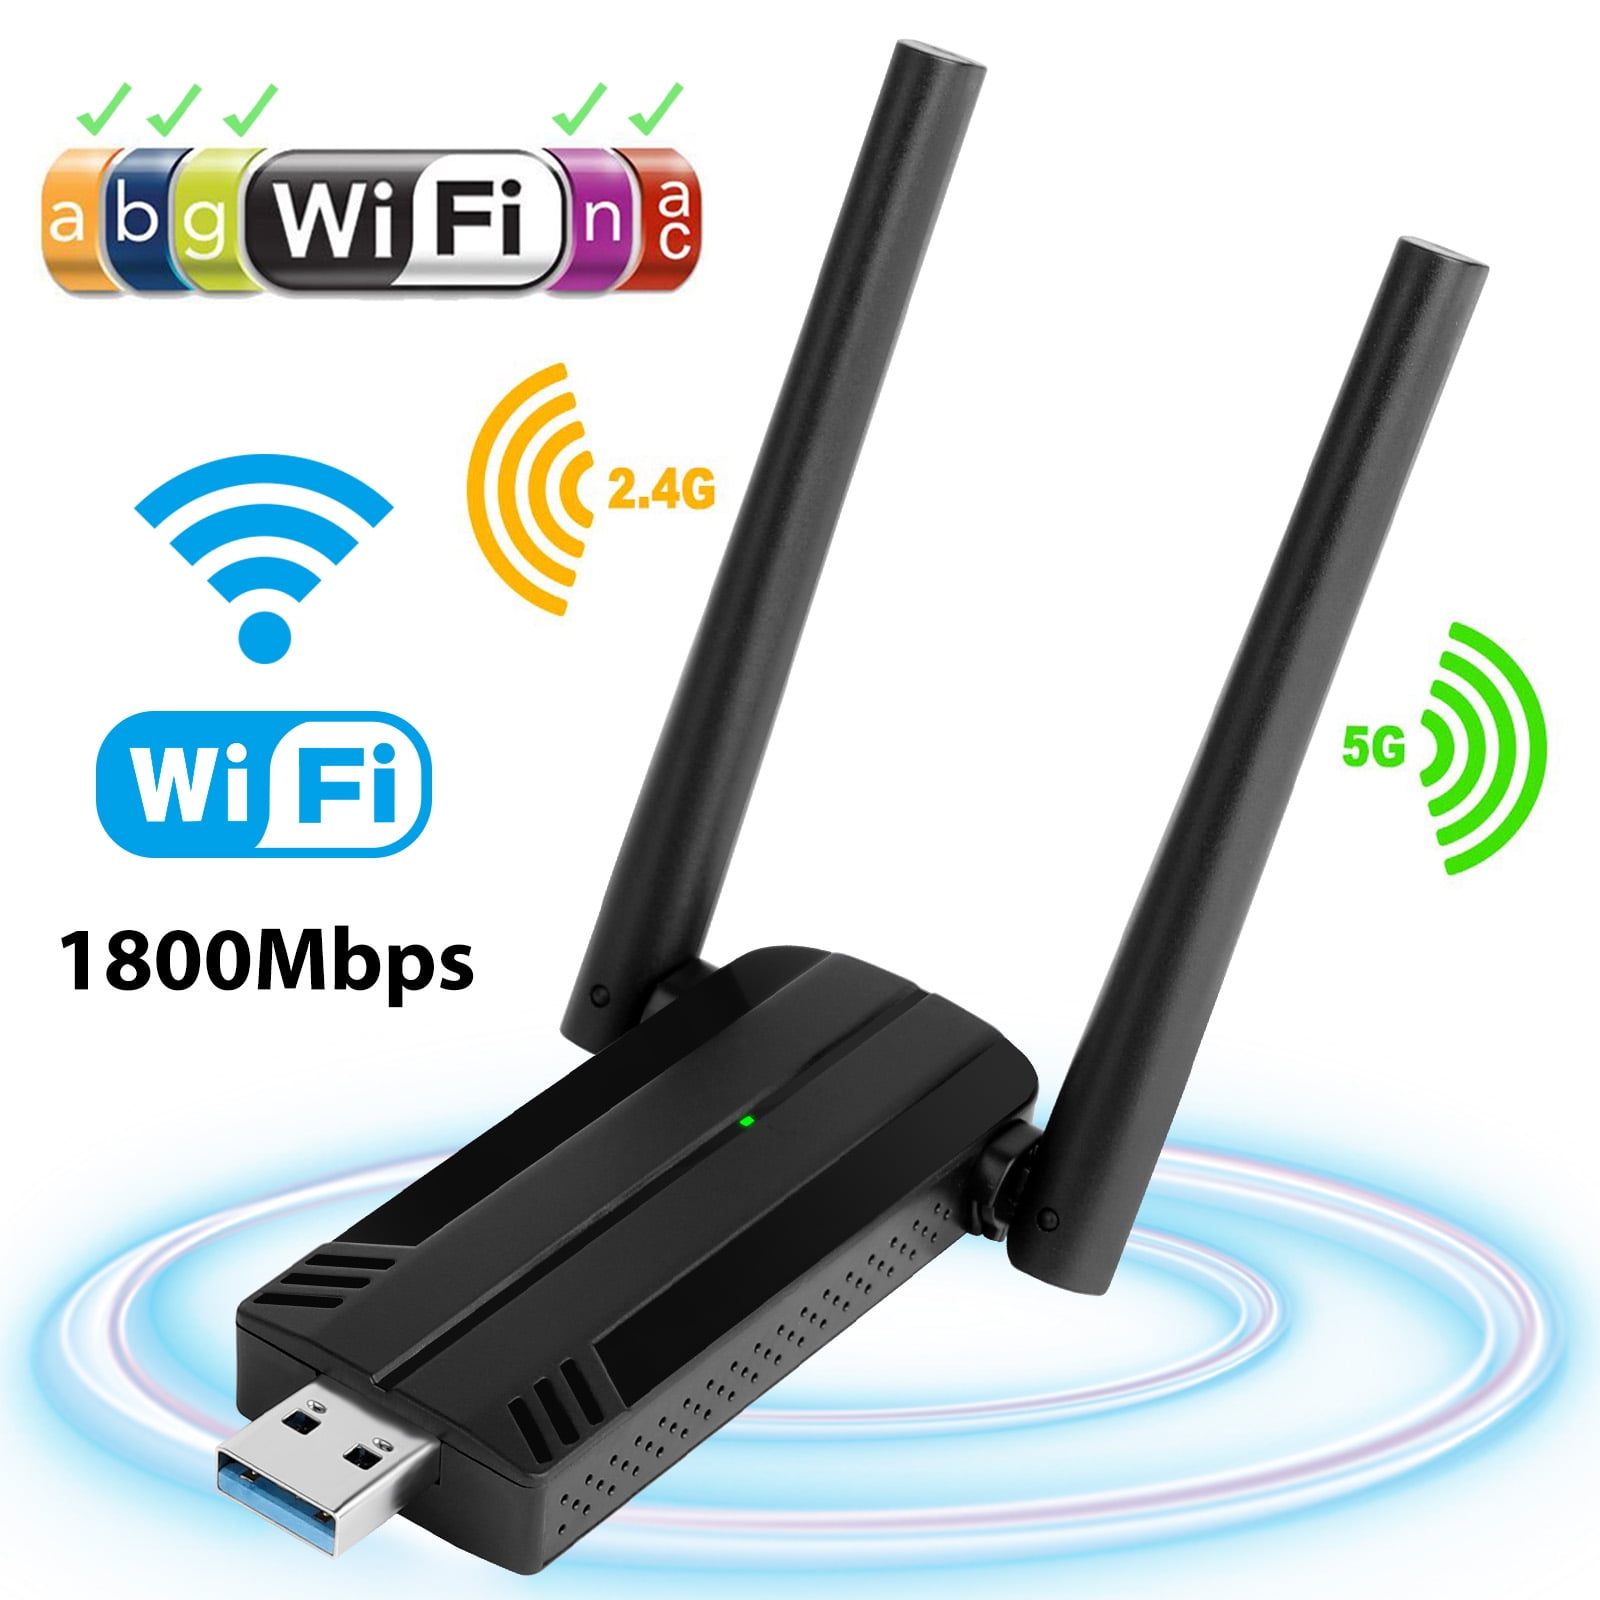 throw away Cilia Consulate USB WiFi Adapter for PC, 1800Mbps Dual Band 2.4GHz/5GHz Fast USB3.0 High  Gain 2dBi Antenna 802.11ac WiFi Dongle Wireless Network Adapter for Desktop  Laptop Supports Windows Mac Linux - Walmart.com